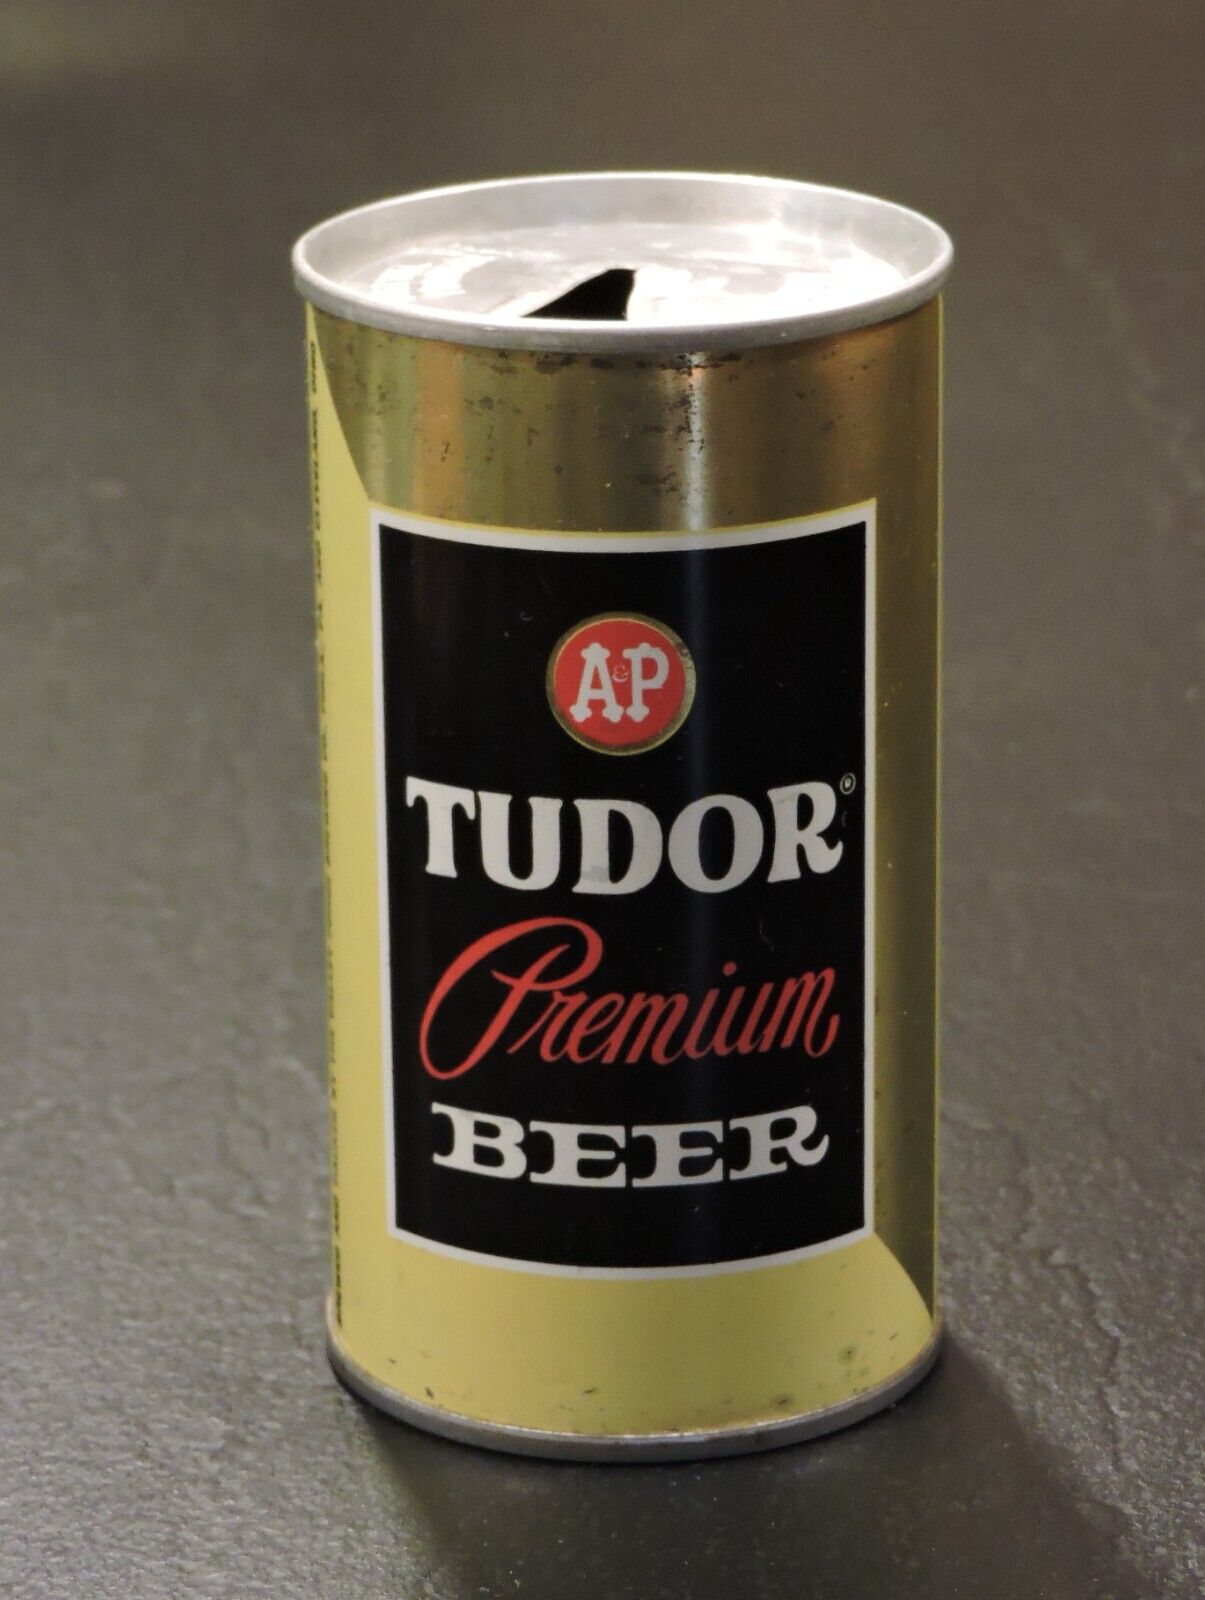 A&P TUDOR BEER, VALLEY FORGE BREWING CO., PHILA. PA. TAB TOP BEER CAN #132-1